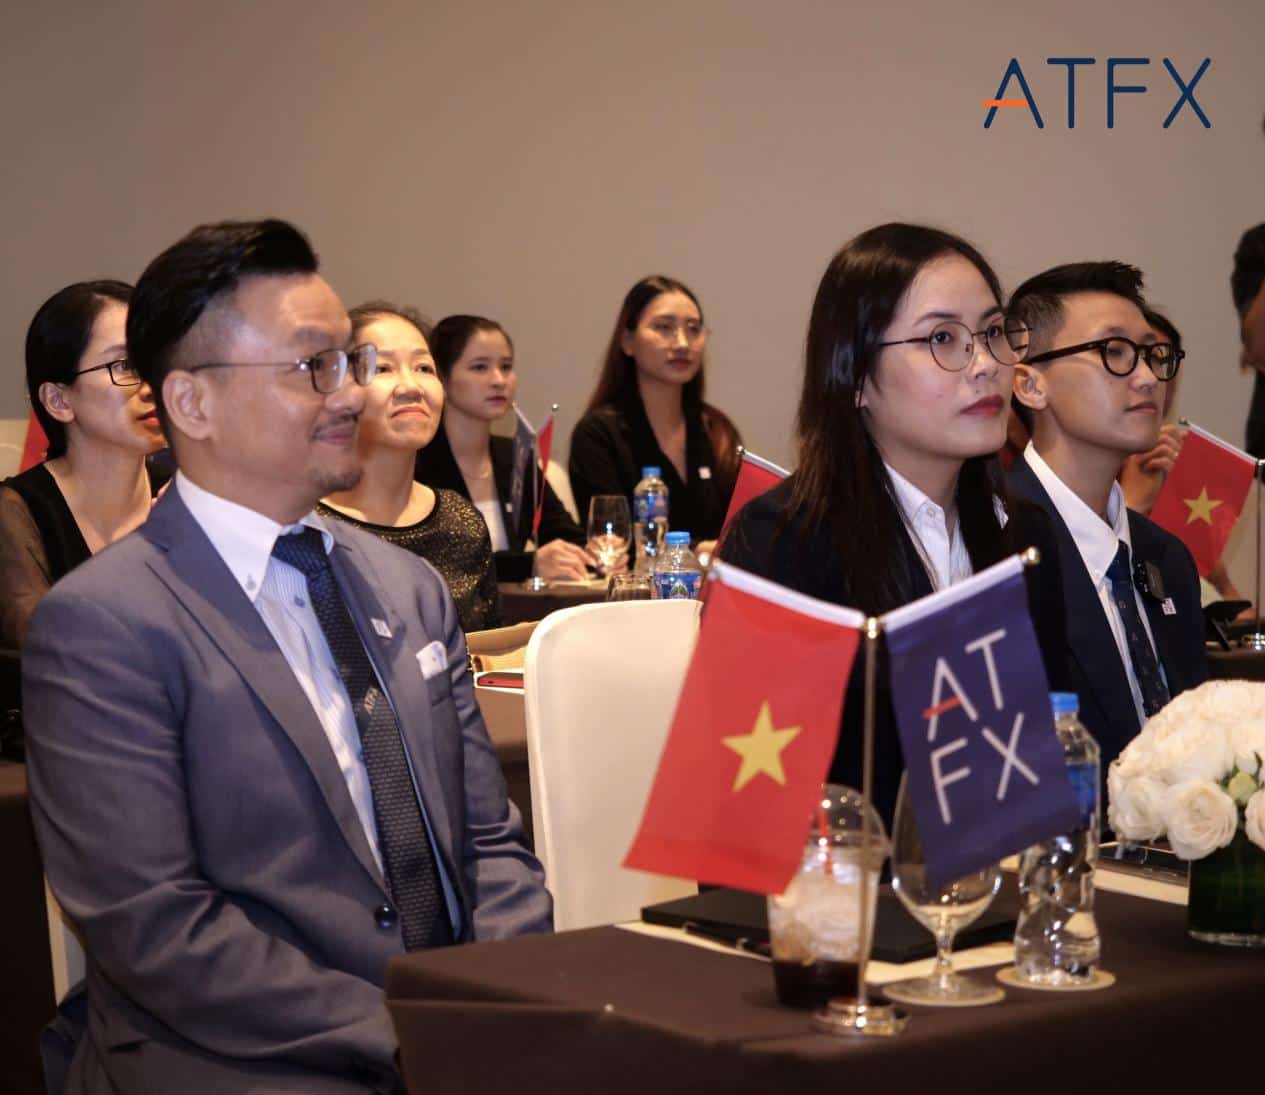 BOSSPlan to open a new chapter,ATFXOpening a New Chapter in the Education Investment Plan: Entering Vietnam513 / author:atfx2019 / PostsID:1726756